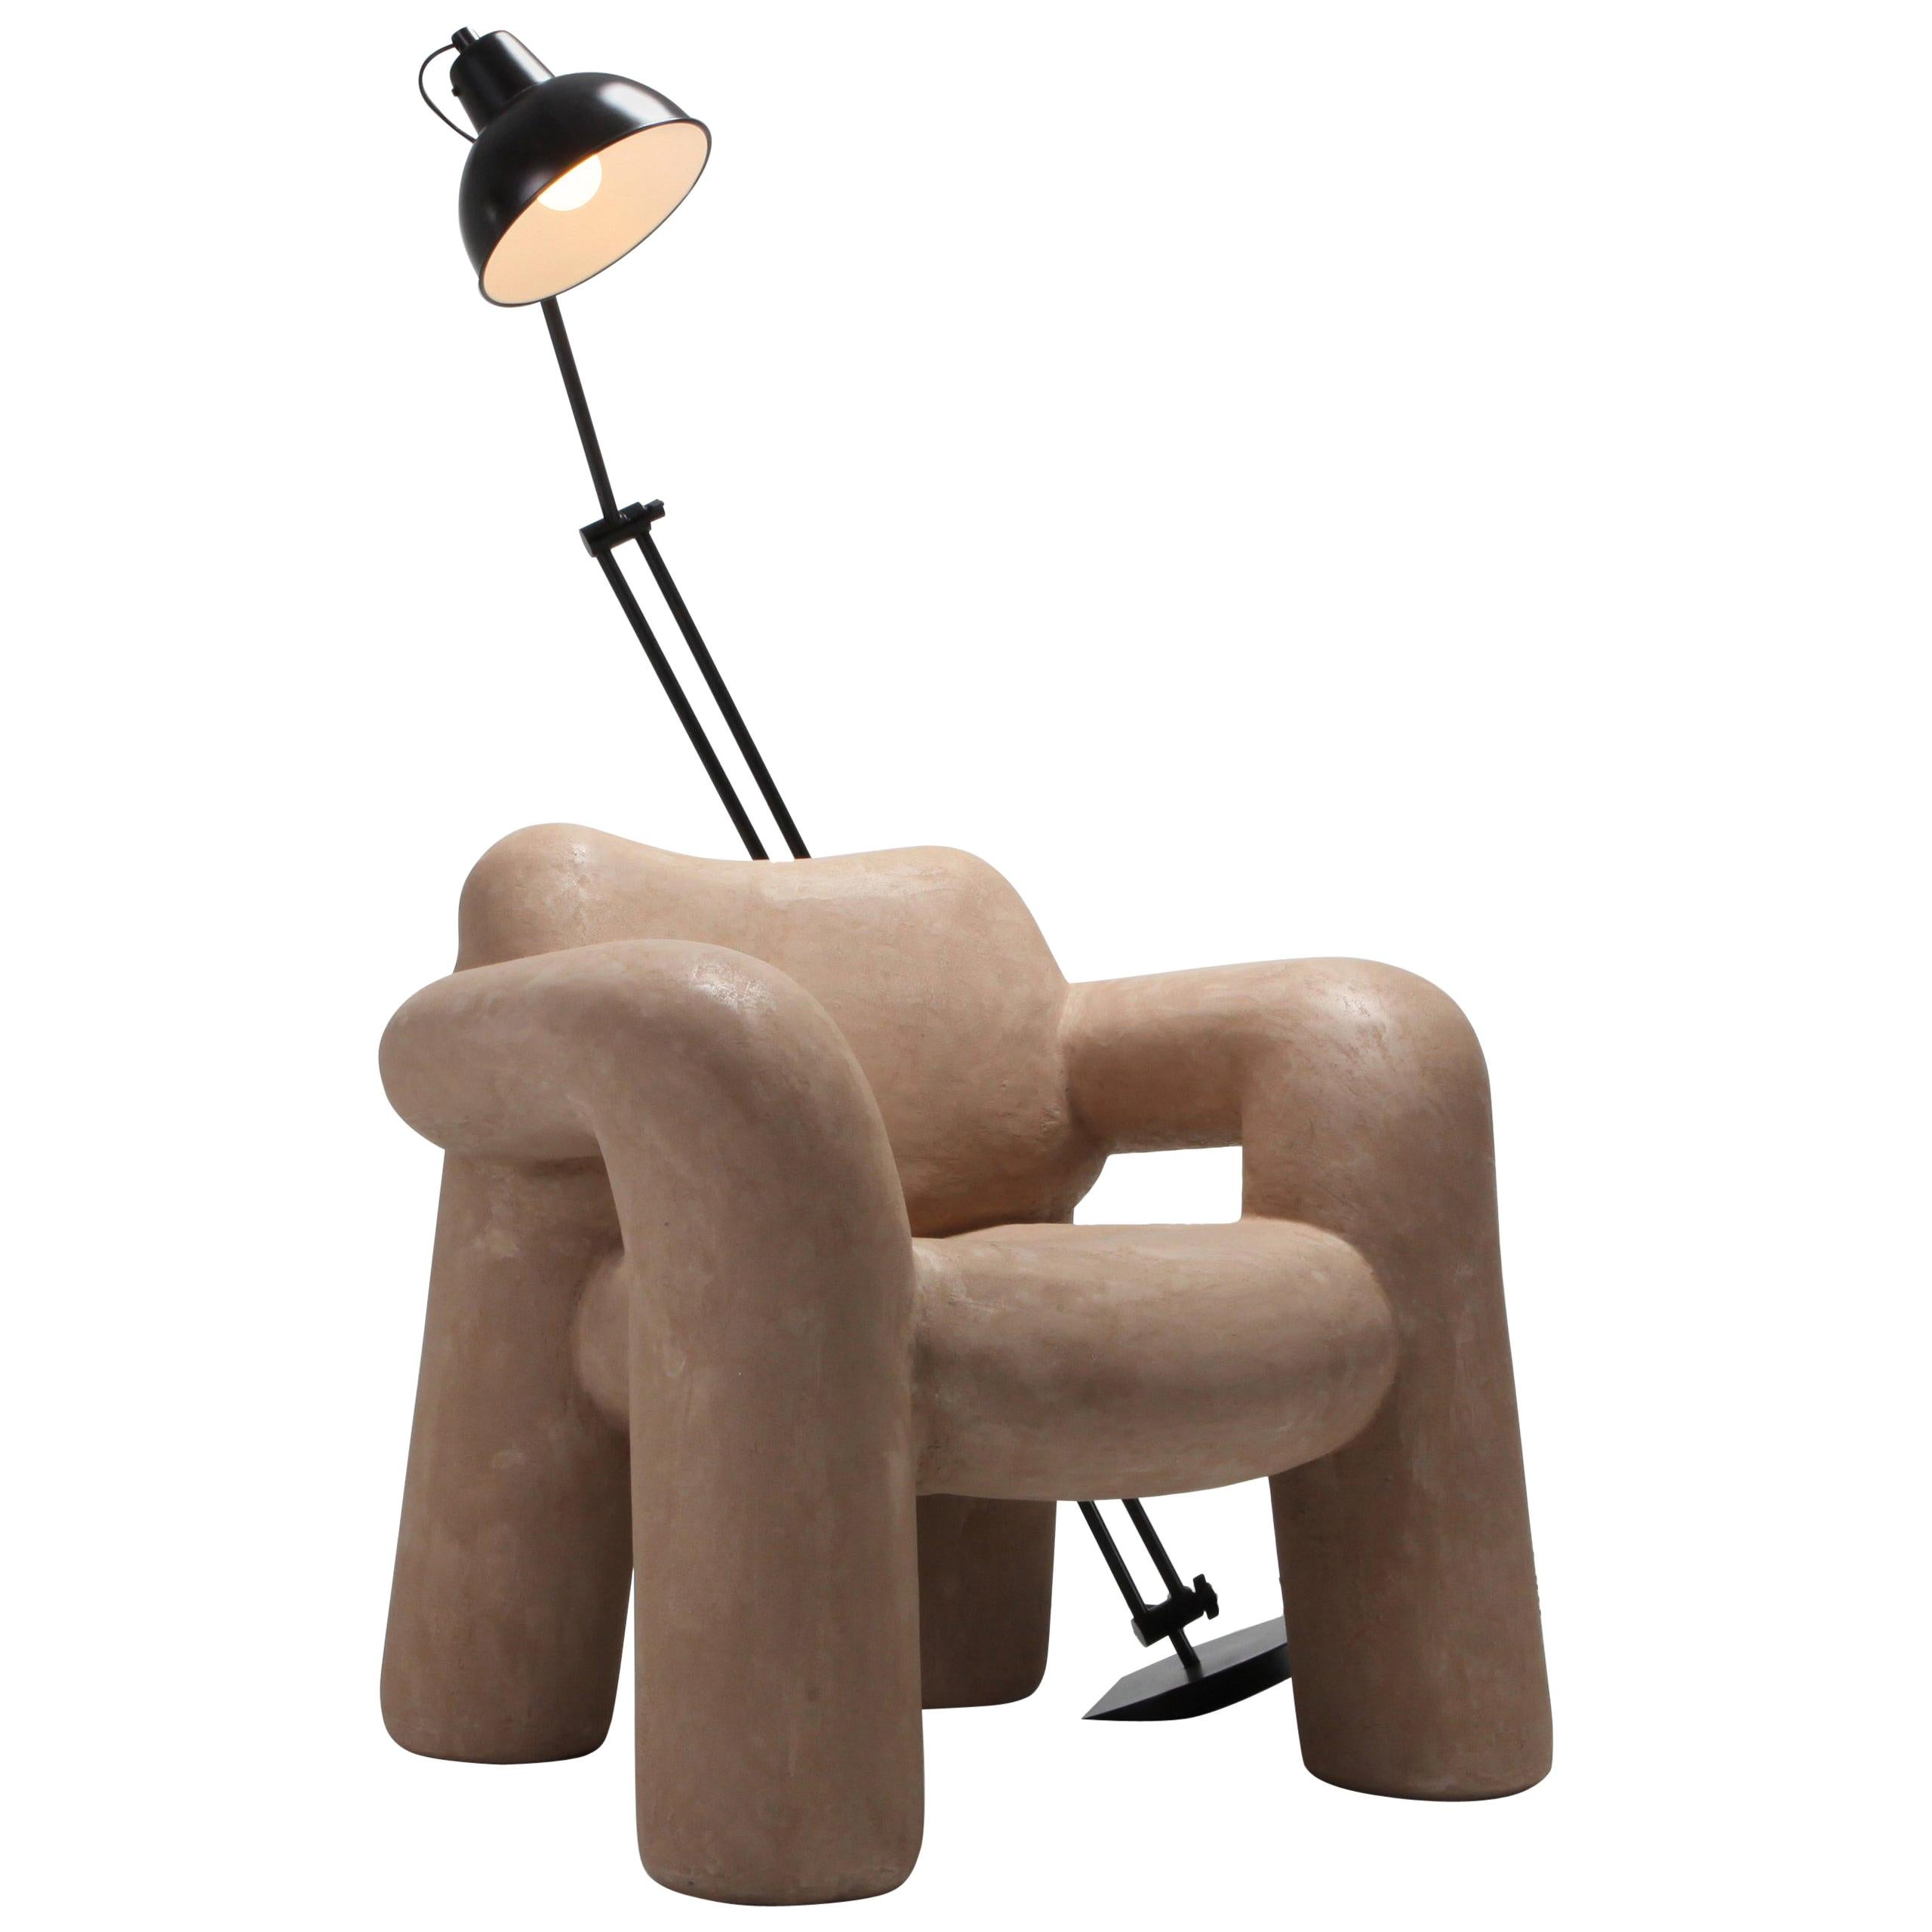 'Blown-Up with Lamp' by Schimmel & Schweikle in Vegan Leather Coating